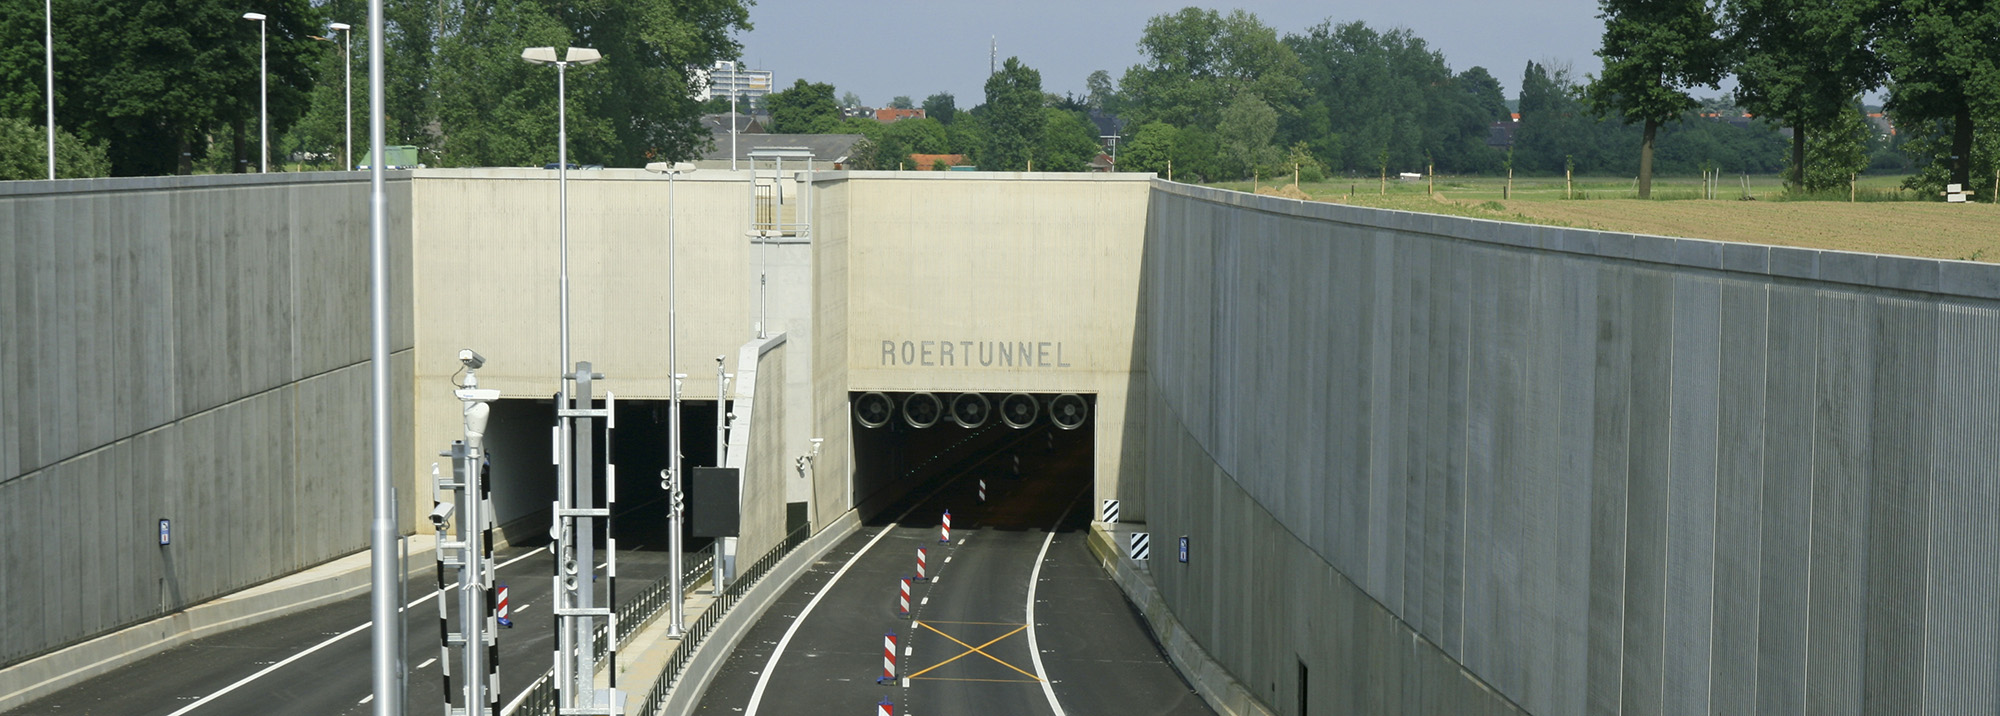 Trillingshinder tunnel Roermond